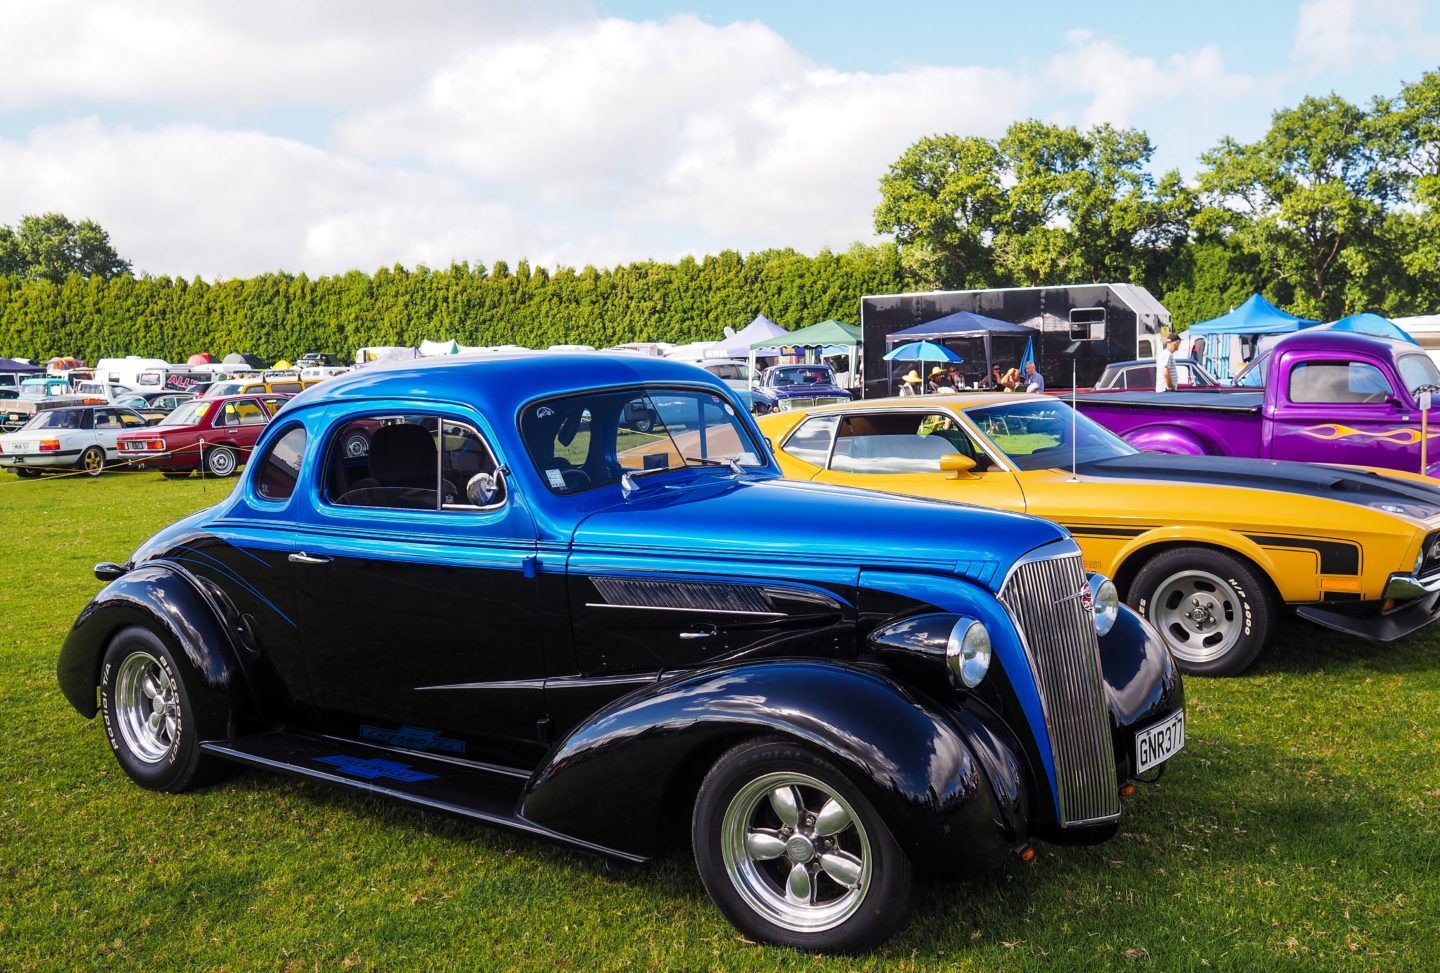 New Zealand Travel InspirationExploring the Kumeu Classic Car Show in Auckland; from Hot Rods to American Classics and everything inbetween. A great family day out in Auckland. #newzealand #auckland #80pairsofshoes